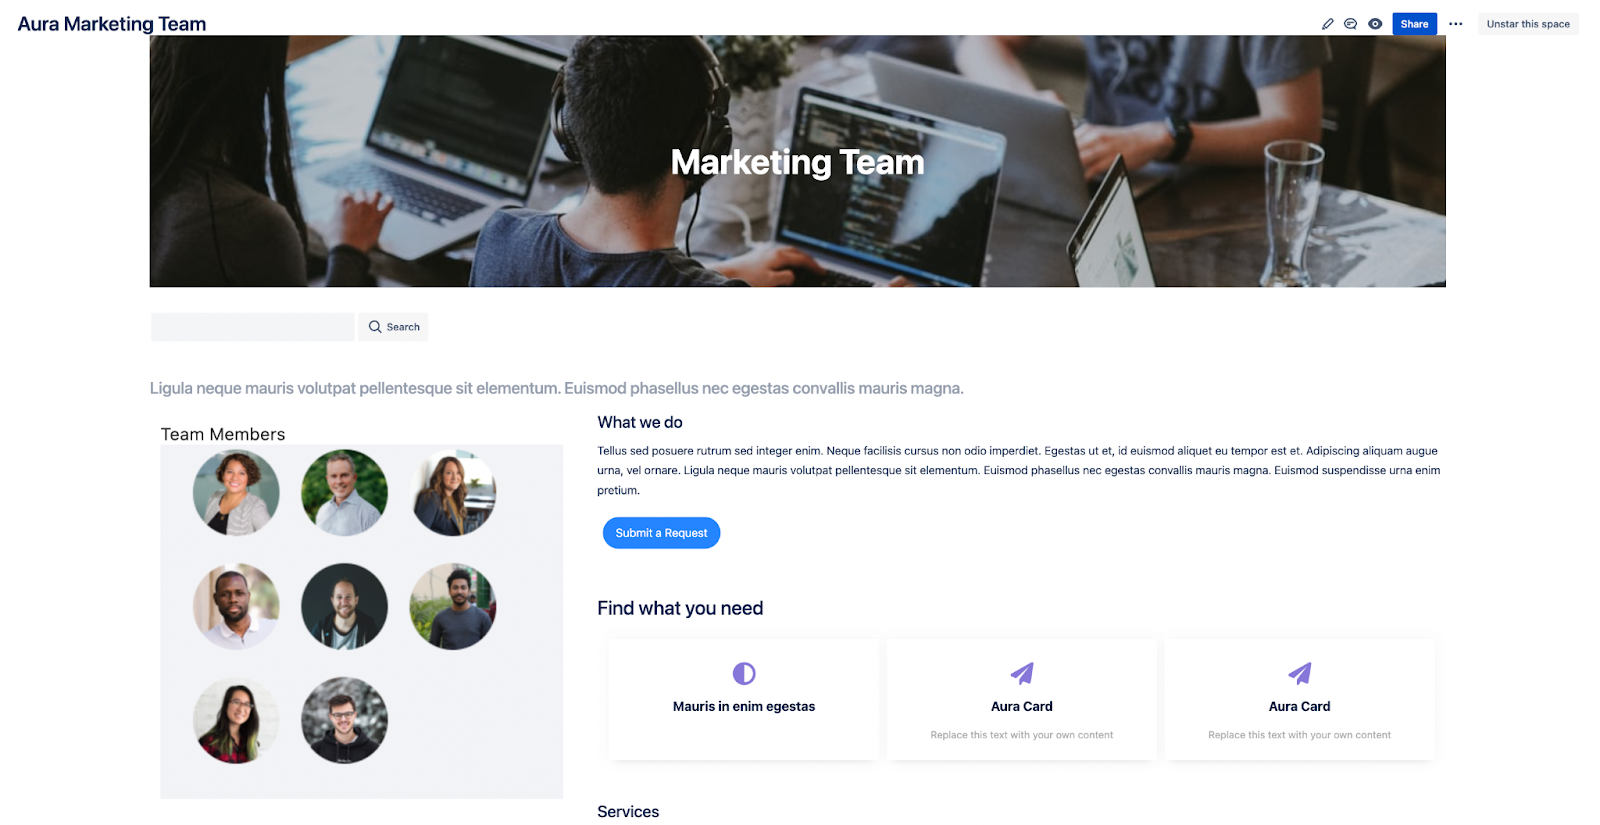 How To Create an Engaging Team Page in Confluence - team space: final product with aura title, background, button and cards